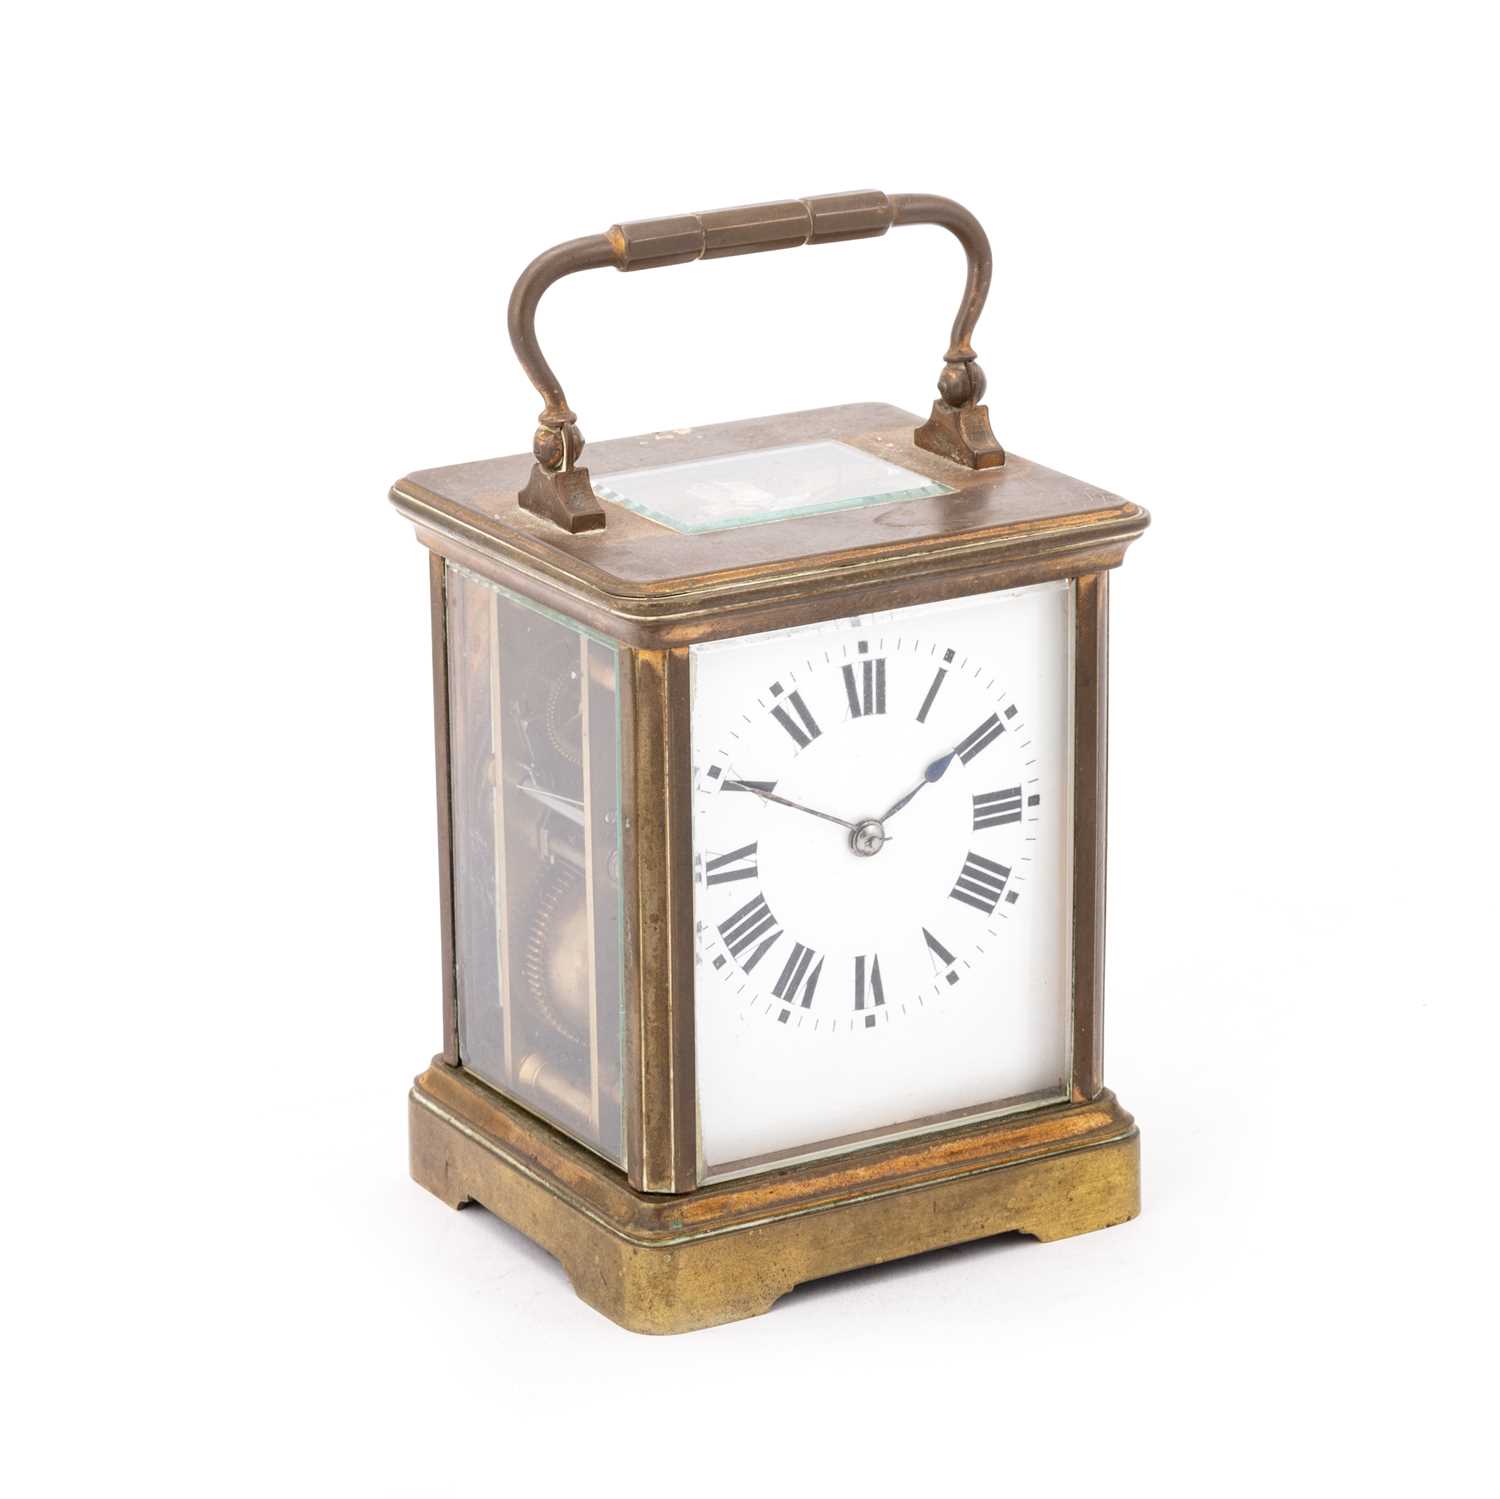 A FRENCH BRASS-CASED CARRIAGE CLOCK, EARLY 20TH CENTURY